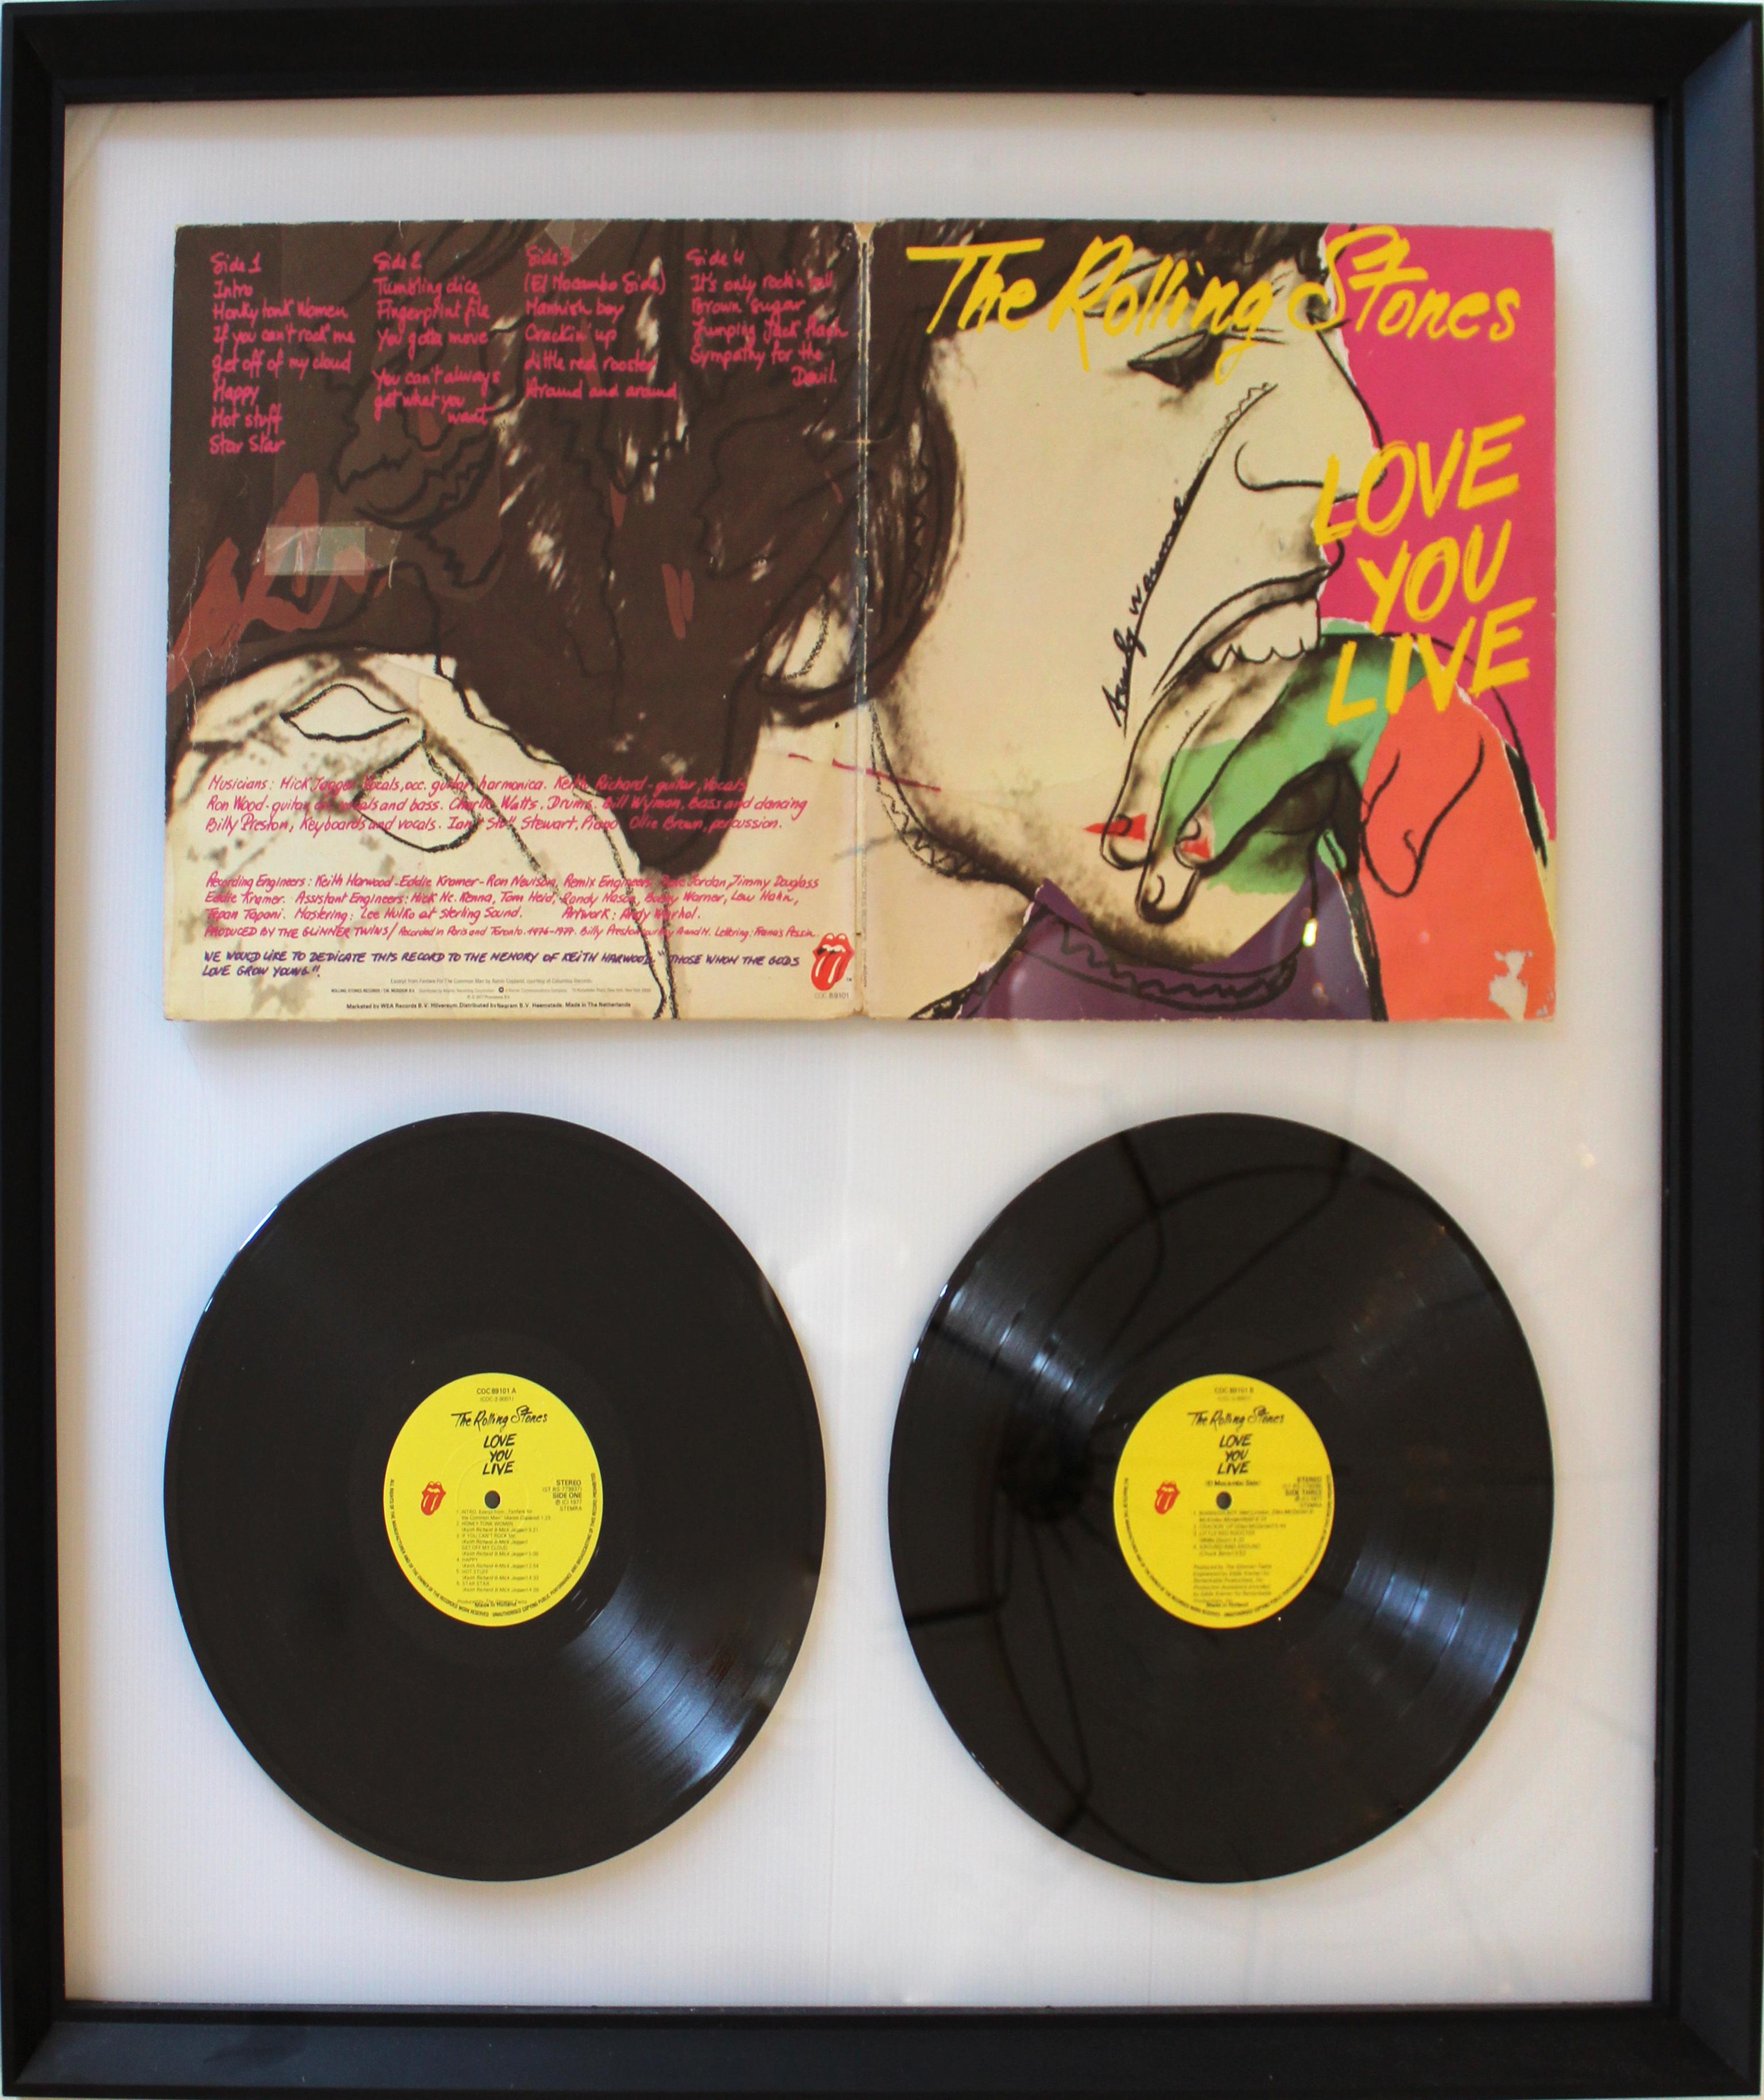 The Rolling Stones, Love You Live, LP, 1977 For Sale 4